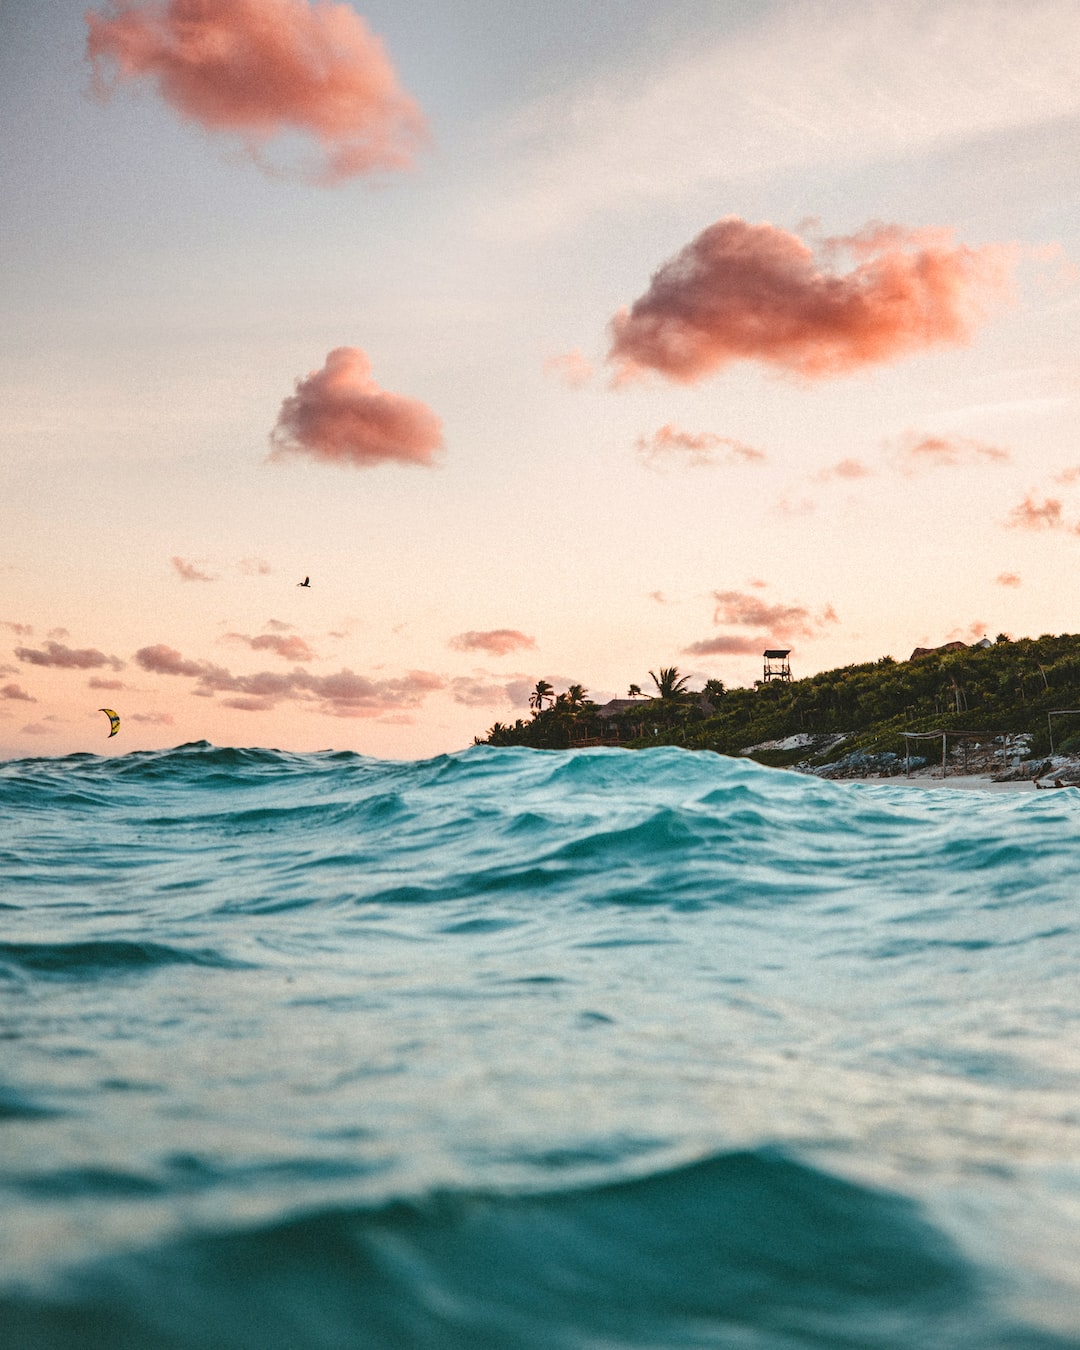 Swimming in Tulum, Mexico by Andy McCune (@andy)